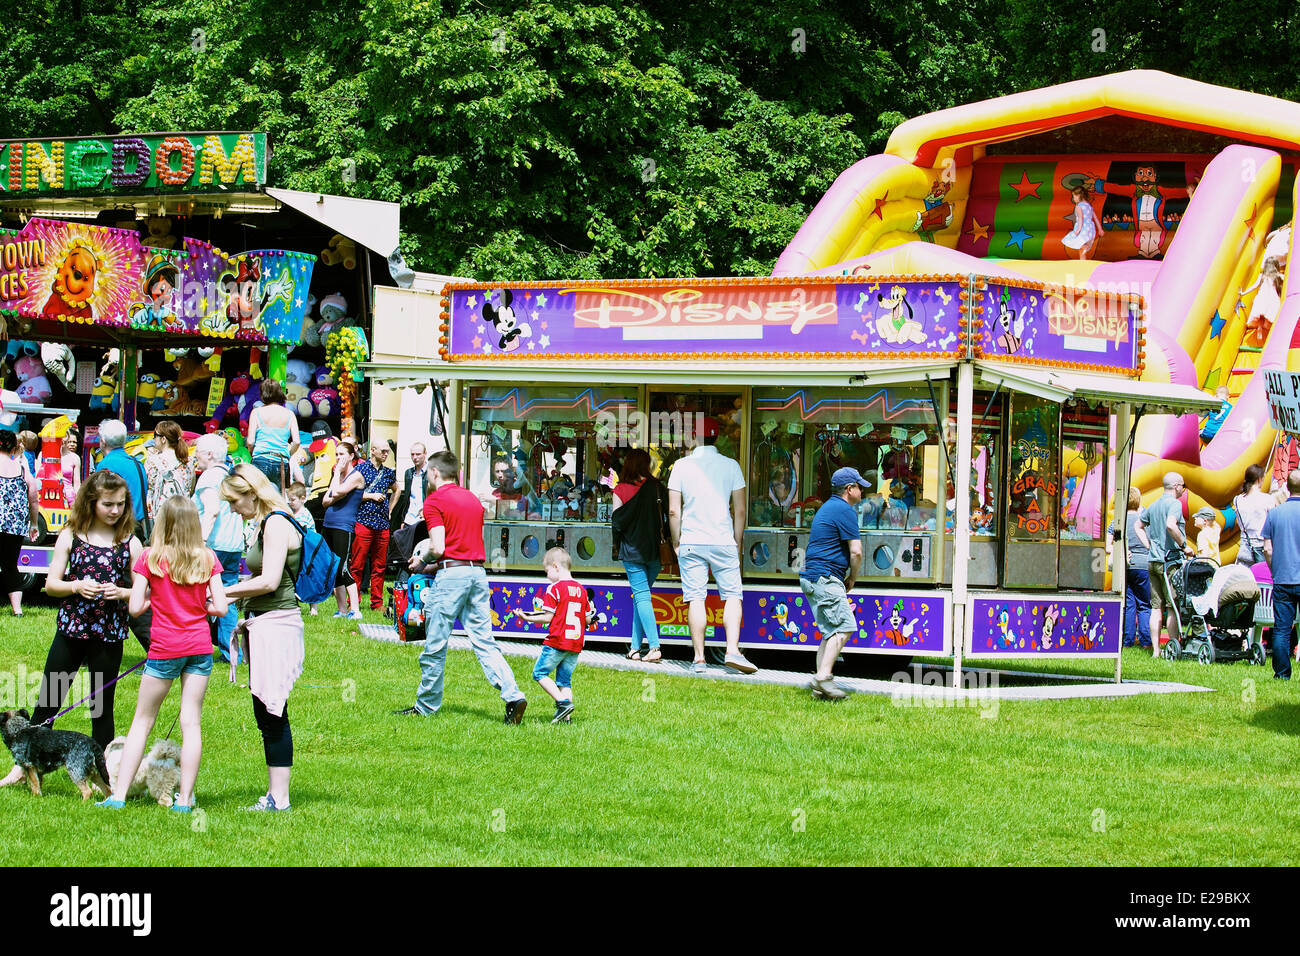 Family day out with fairground stalls for all ages Autokarna 2014 Wollaton Park Nottingham England Stock Photo